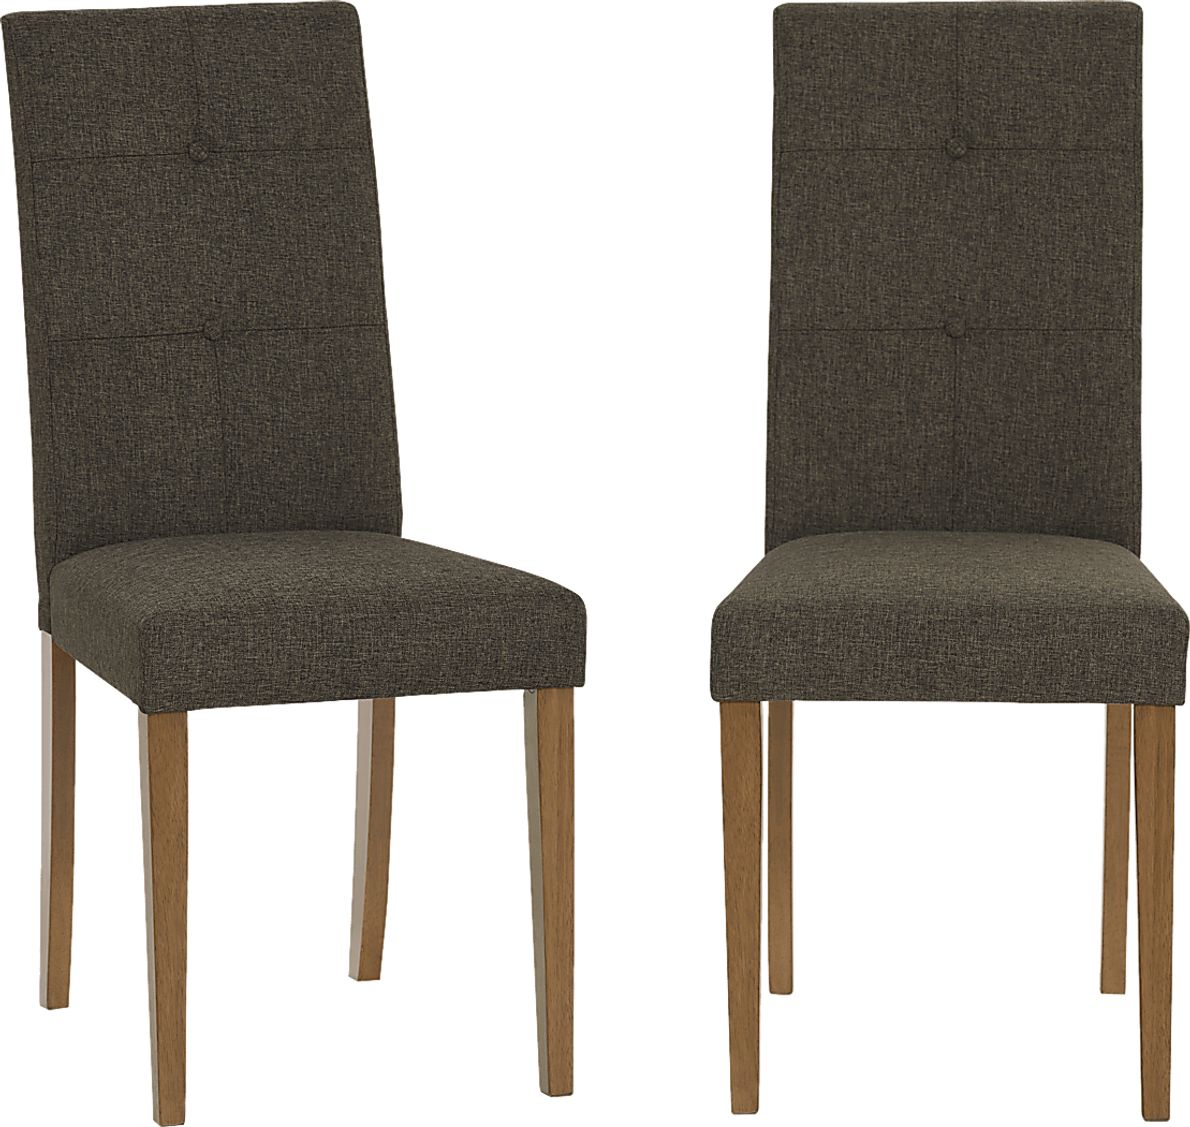 Lasena Gray Dining Chair, Set of 2